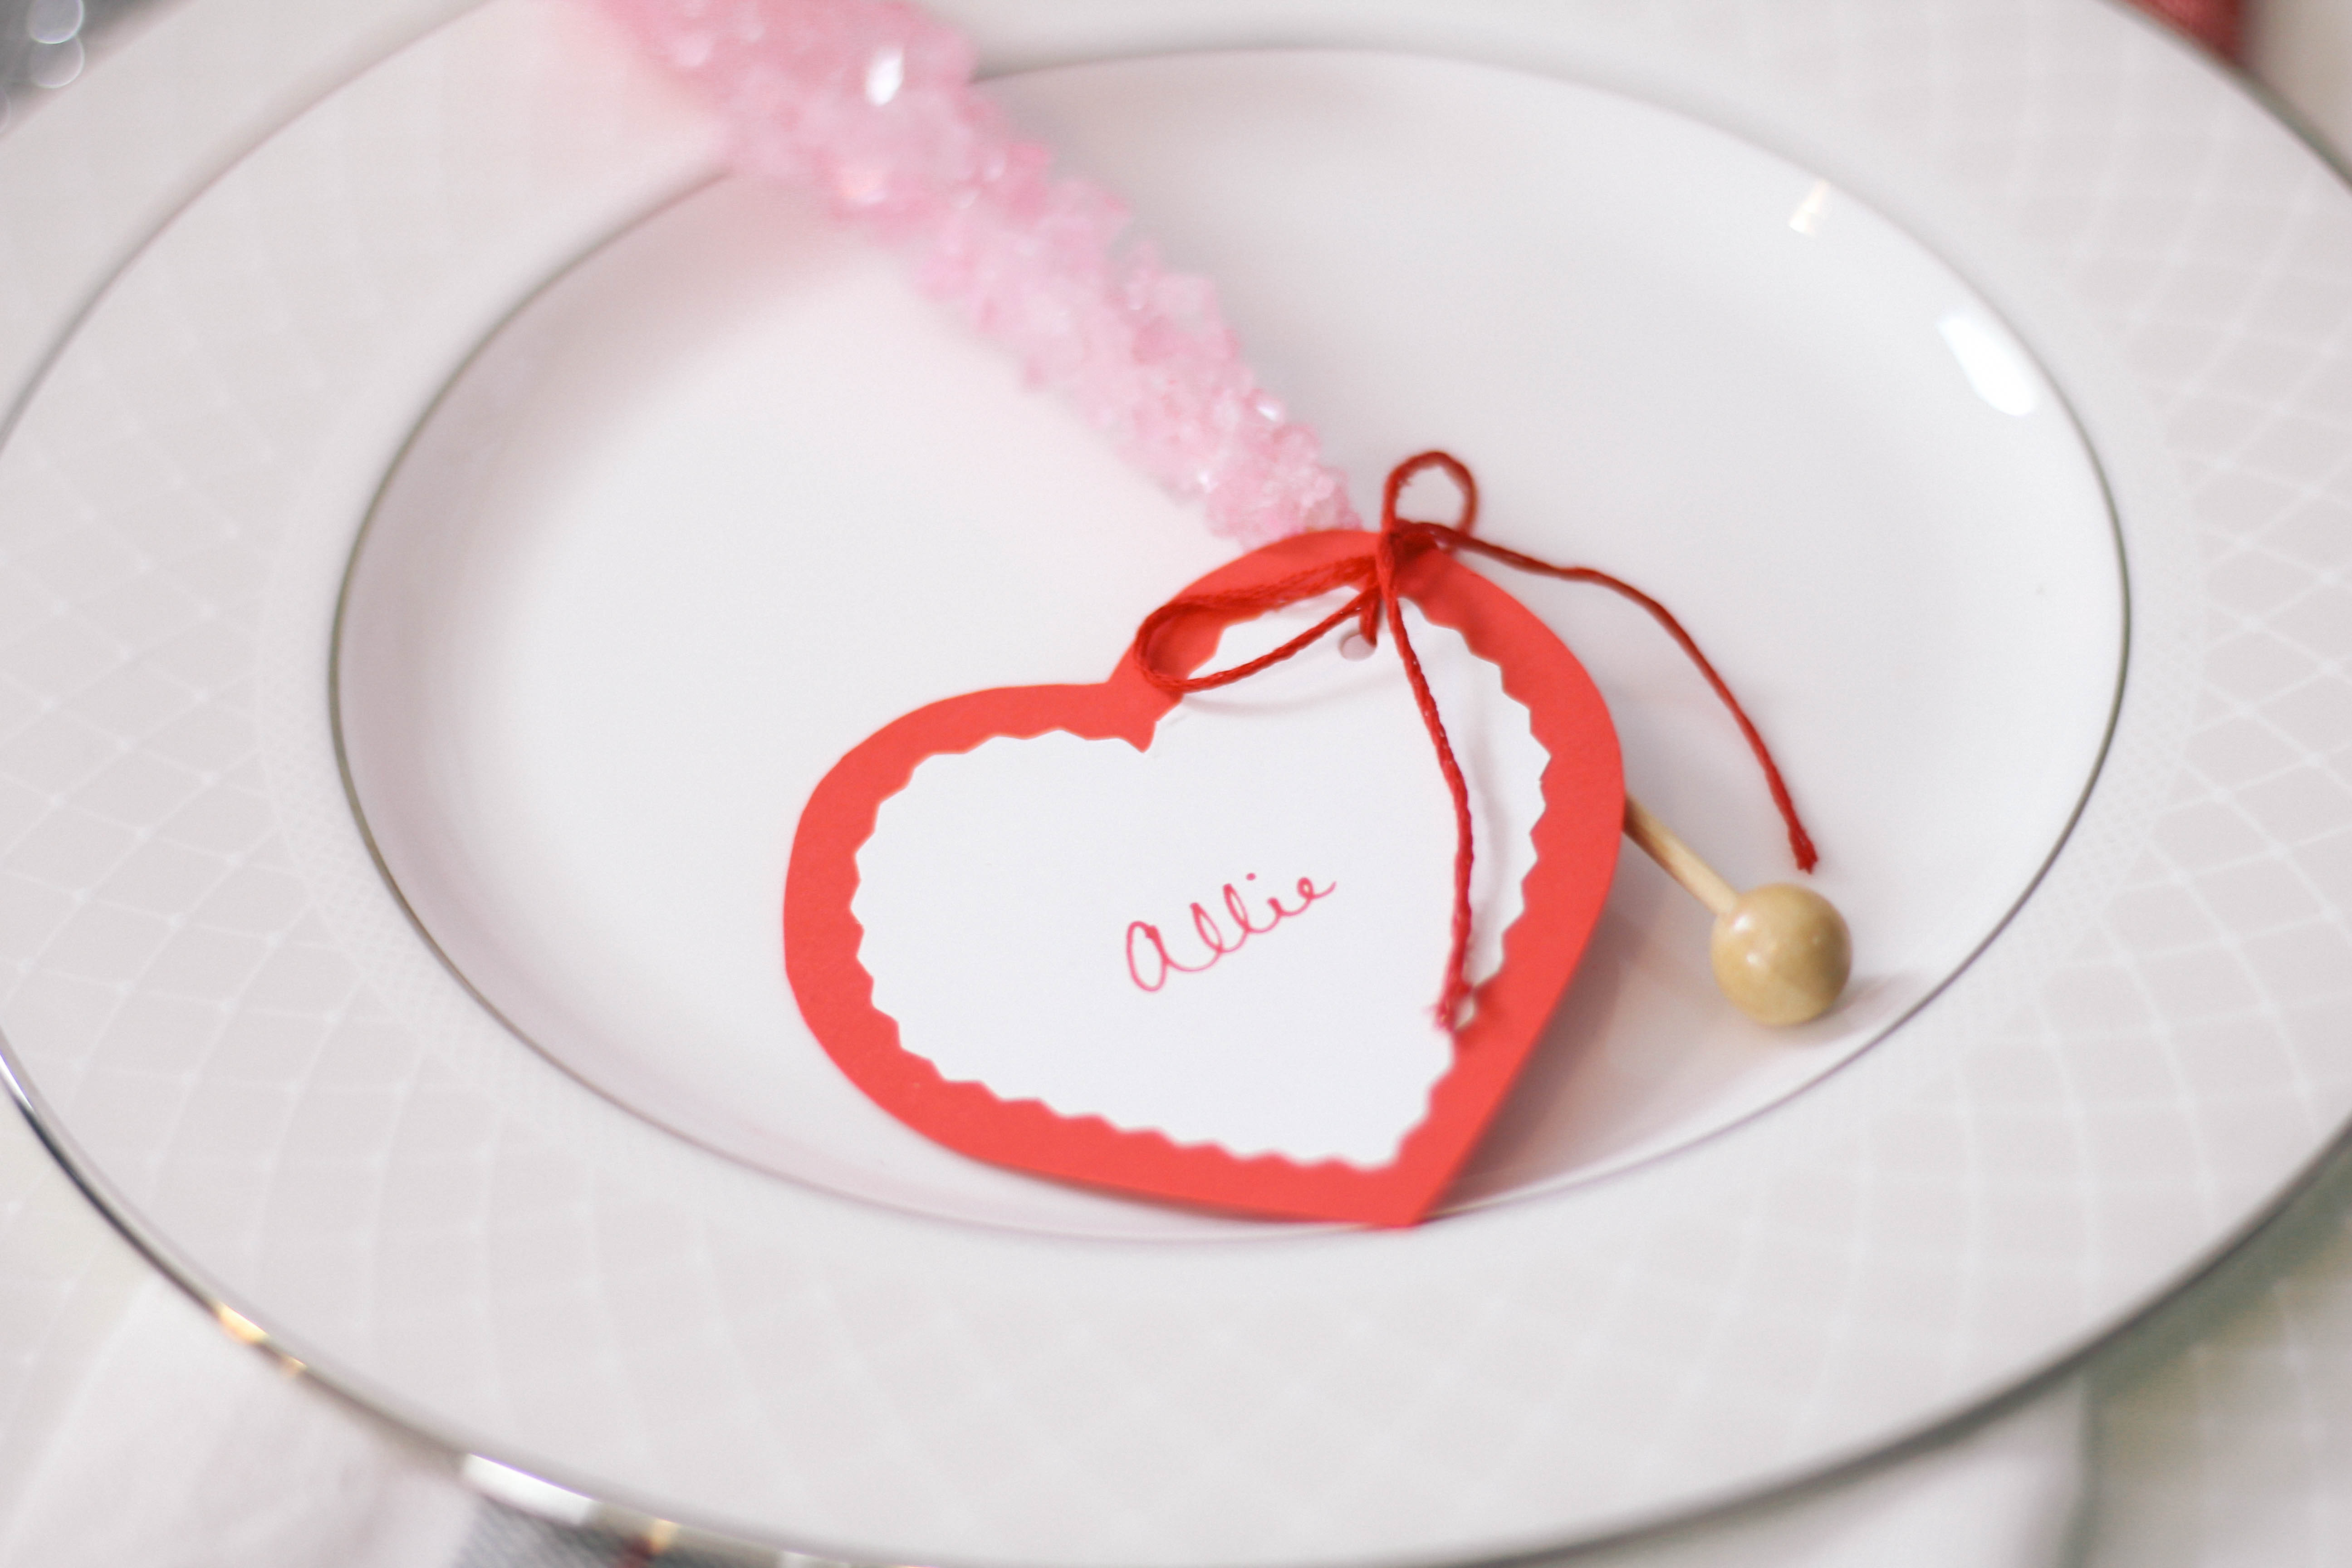 50 Ivory Silver Heart Table Setting Place Name Card Wedding Valentine Love Party 